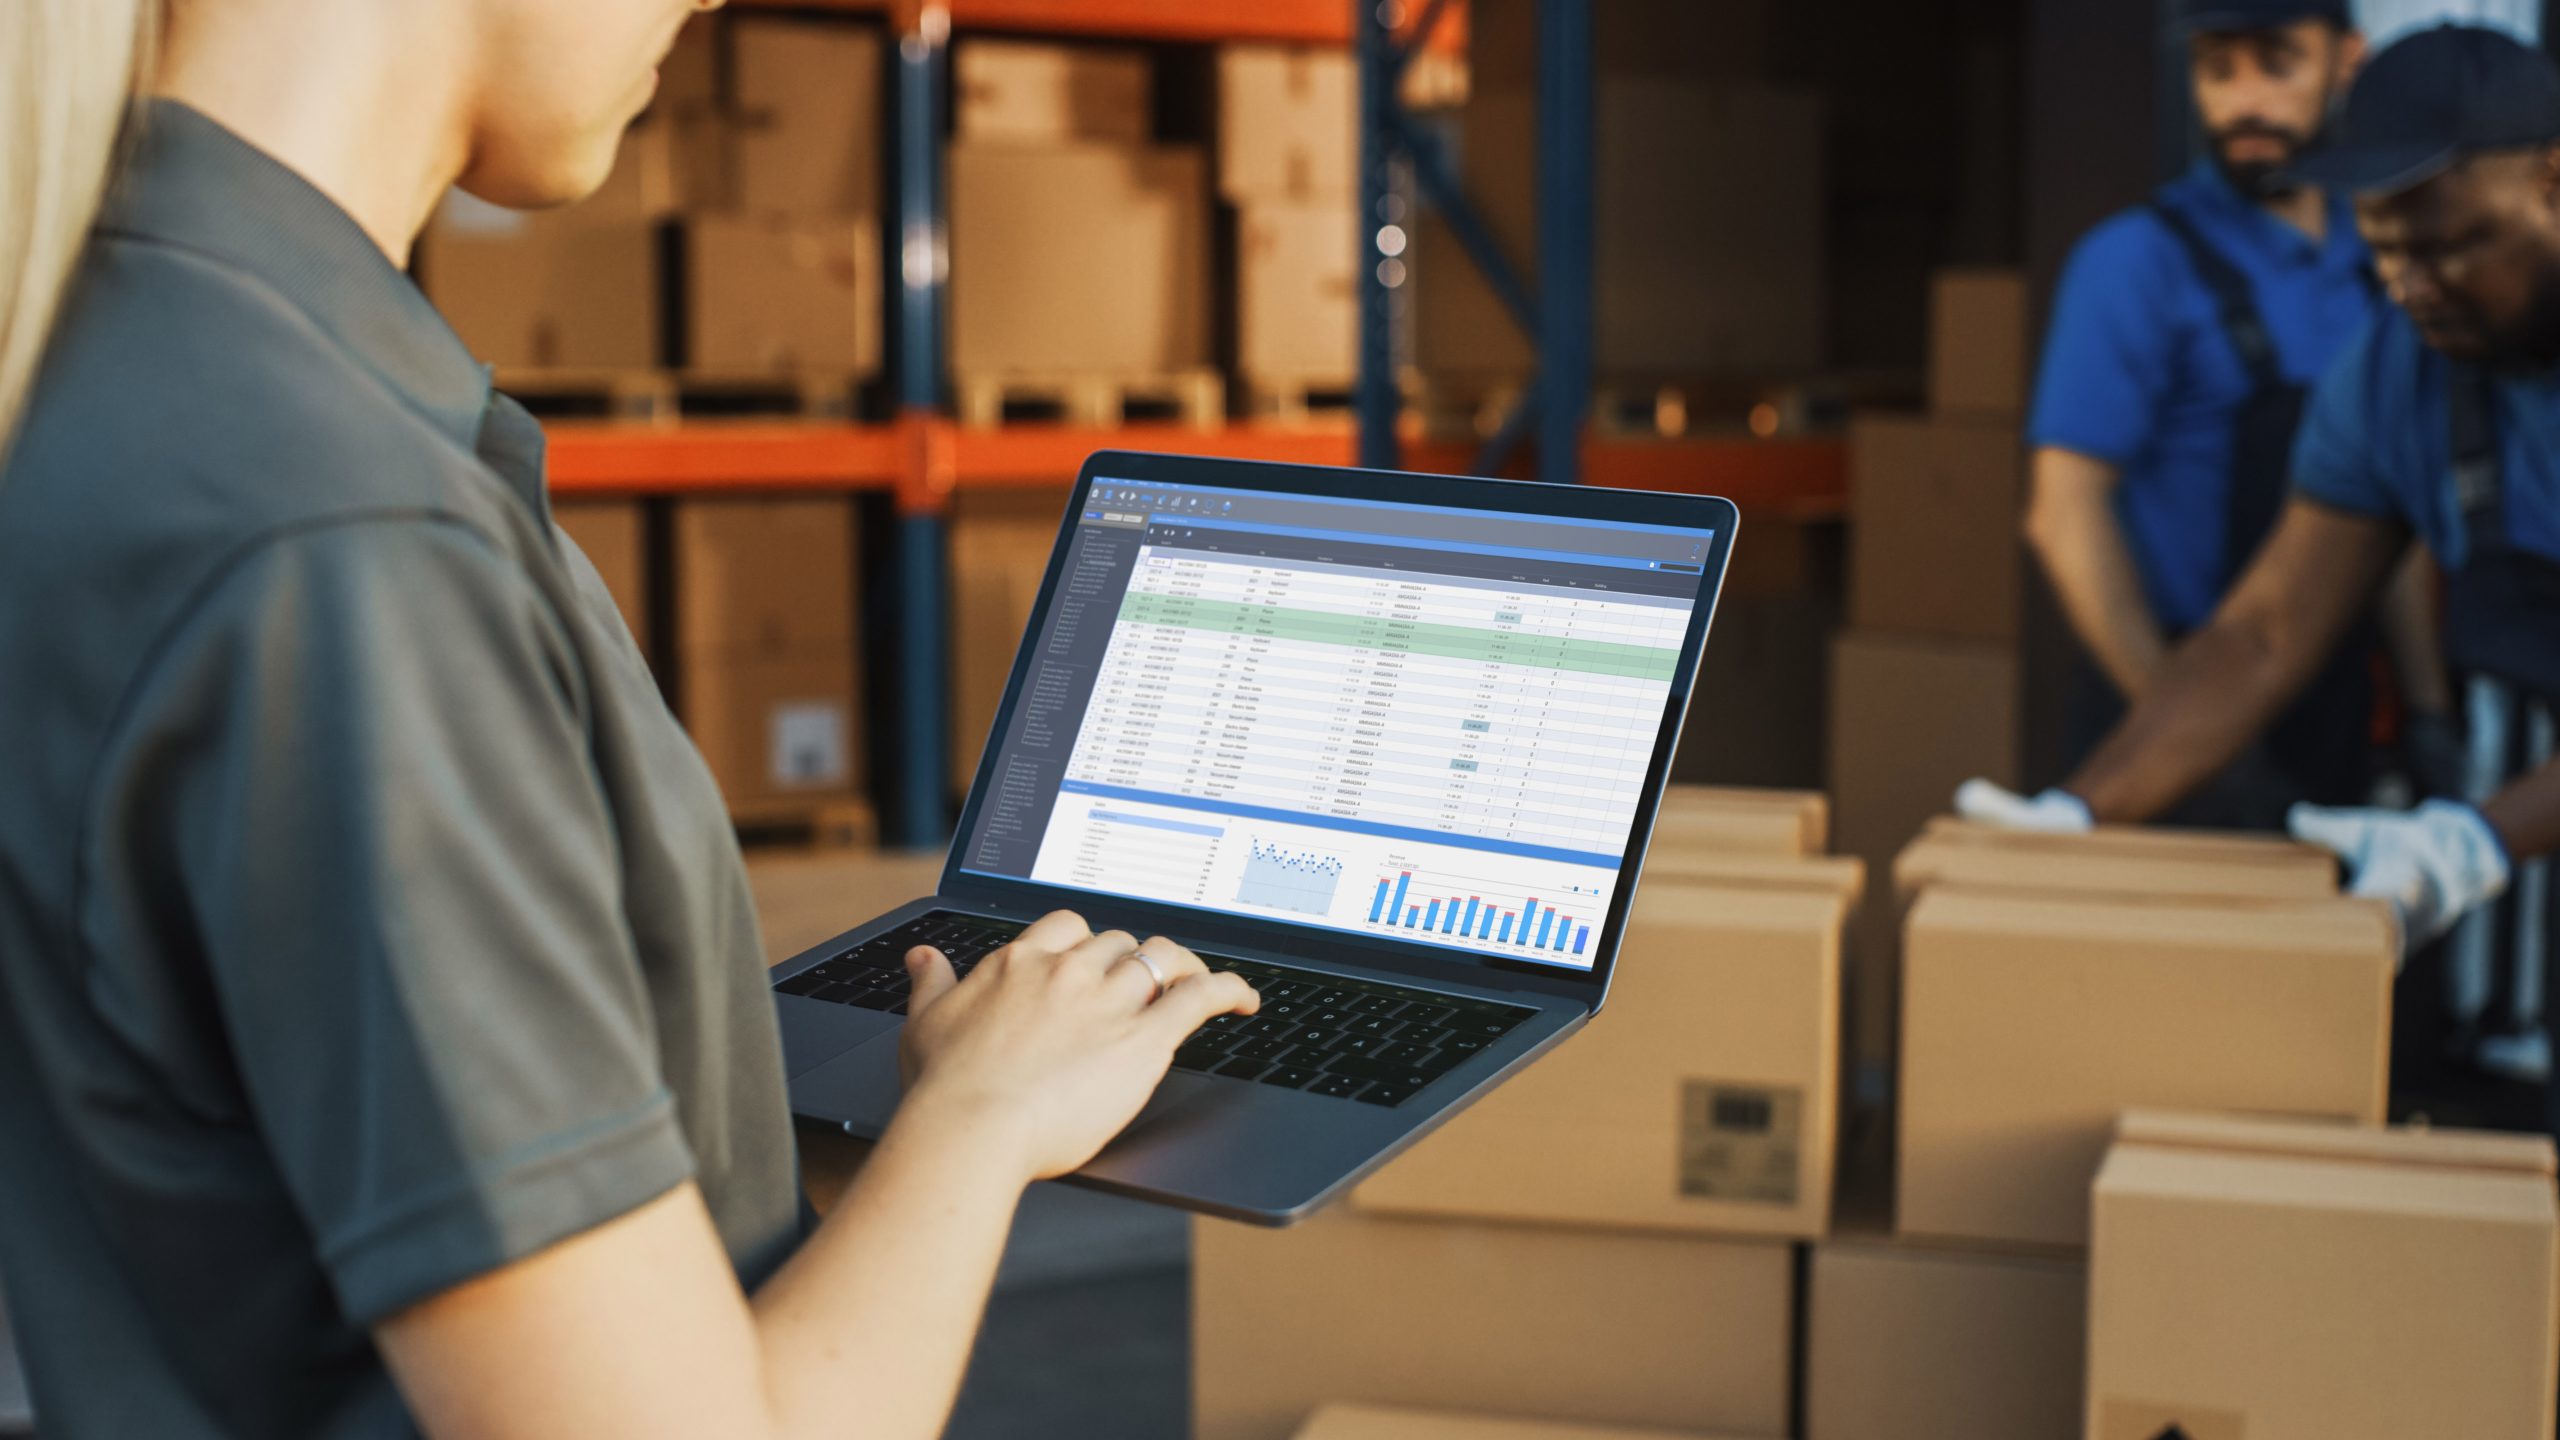 Female shipping manager uses laptop comouter to check inventory